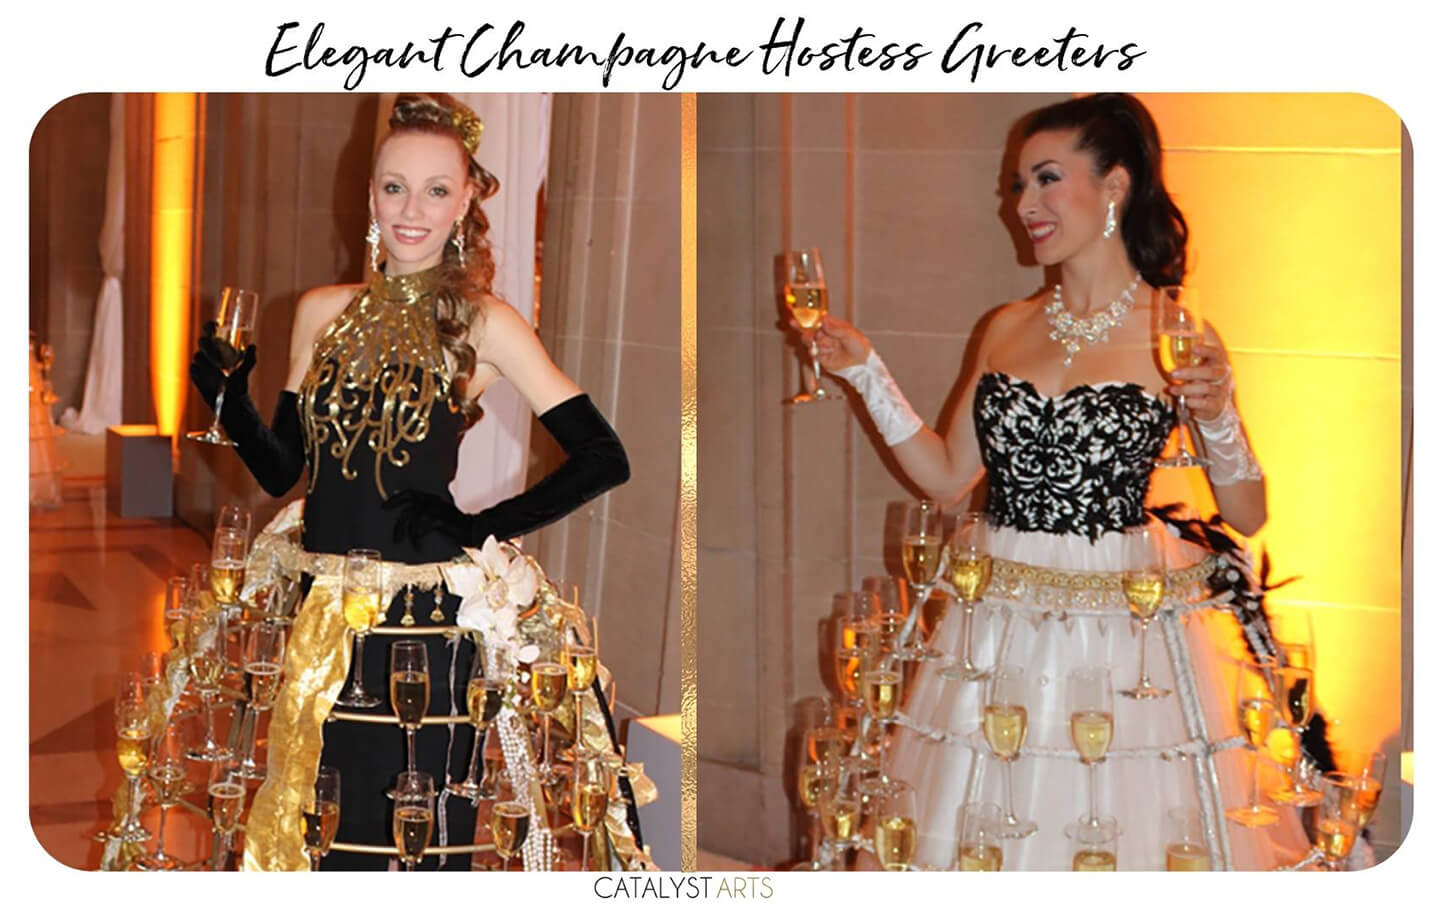 Elegant Champagne Dress Hostesses at SF City Hall Fundraising Gala - by Catalyst Arts Entertainment in San Francisco 